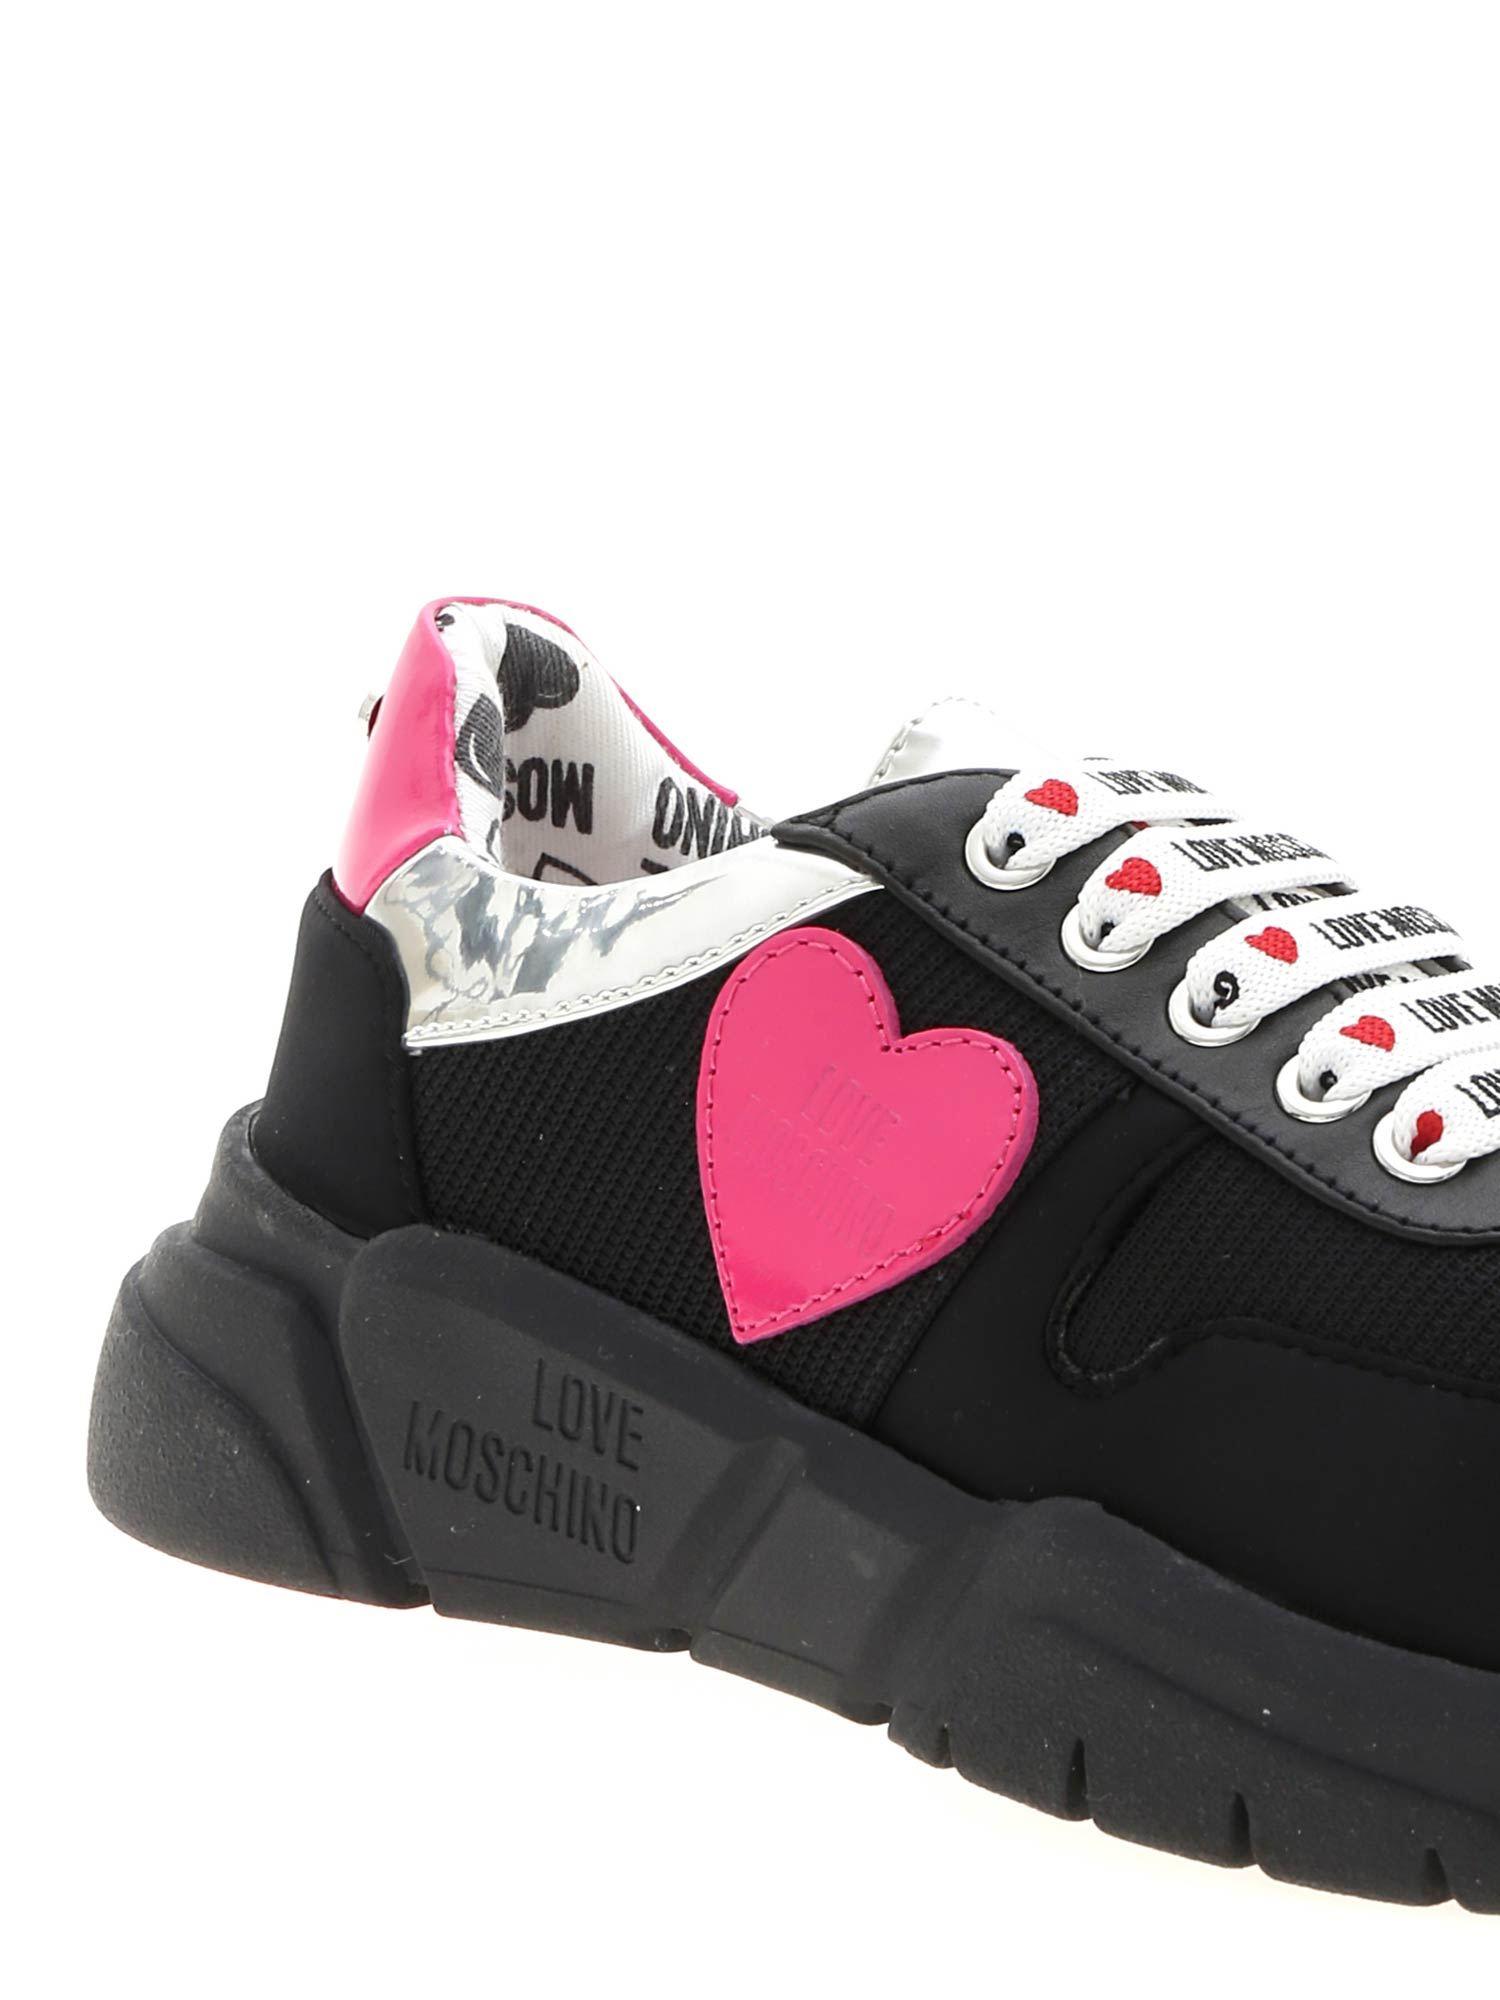 Love Moschino Sneakers In Black With Fuchsia Heart in Black - Lyst